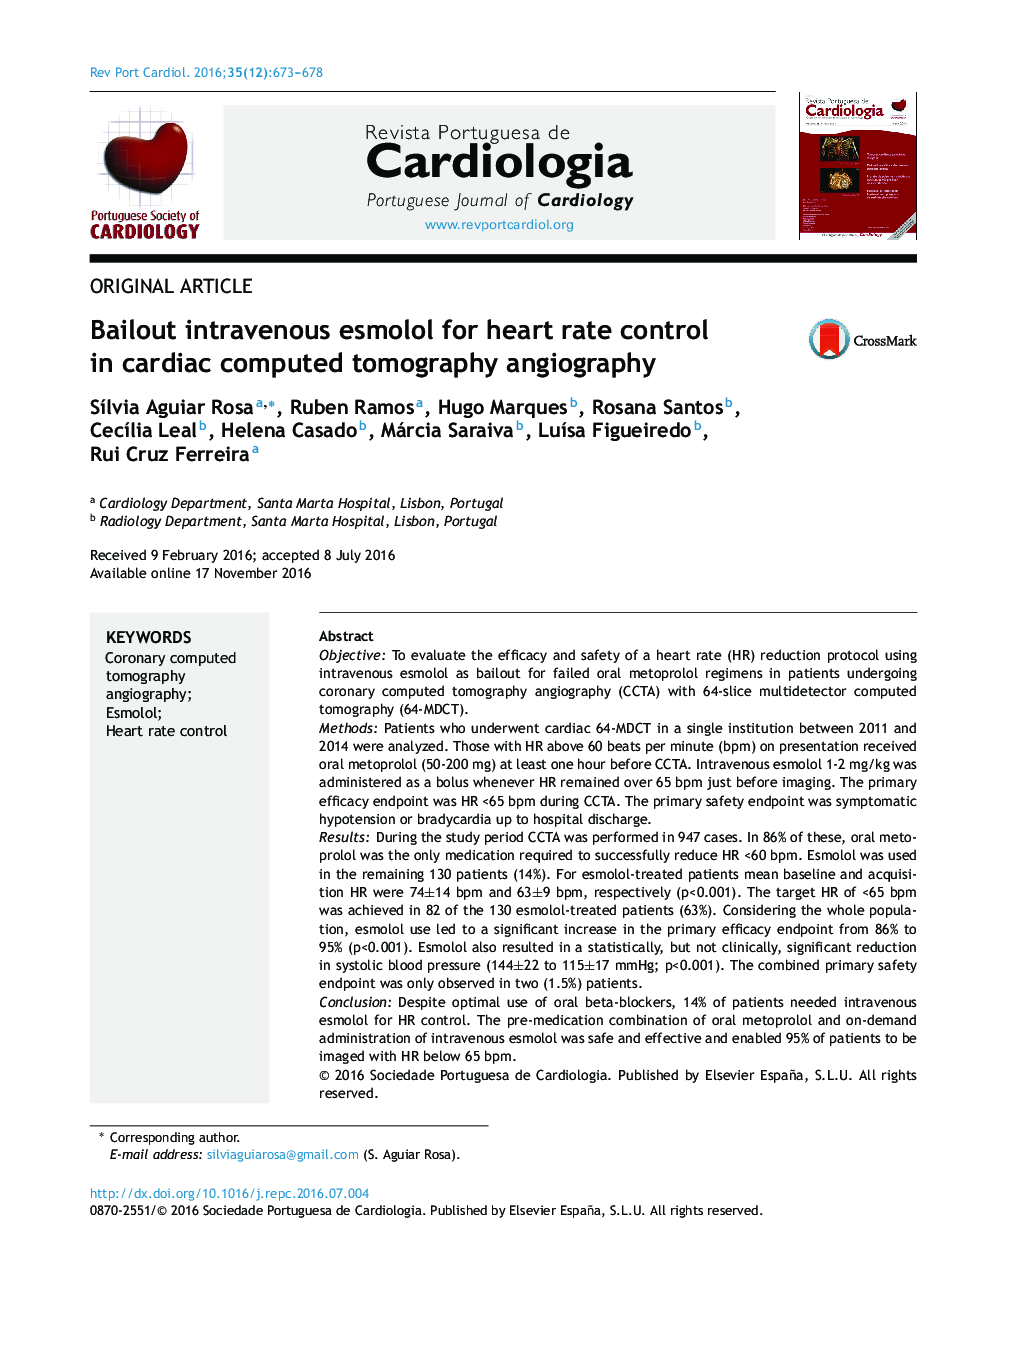 Bailout intravenous esmolol for heart rate control in cardiac computed tomography angiography